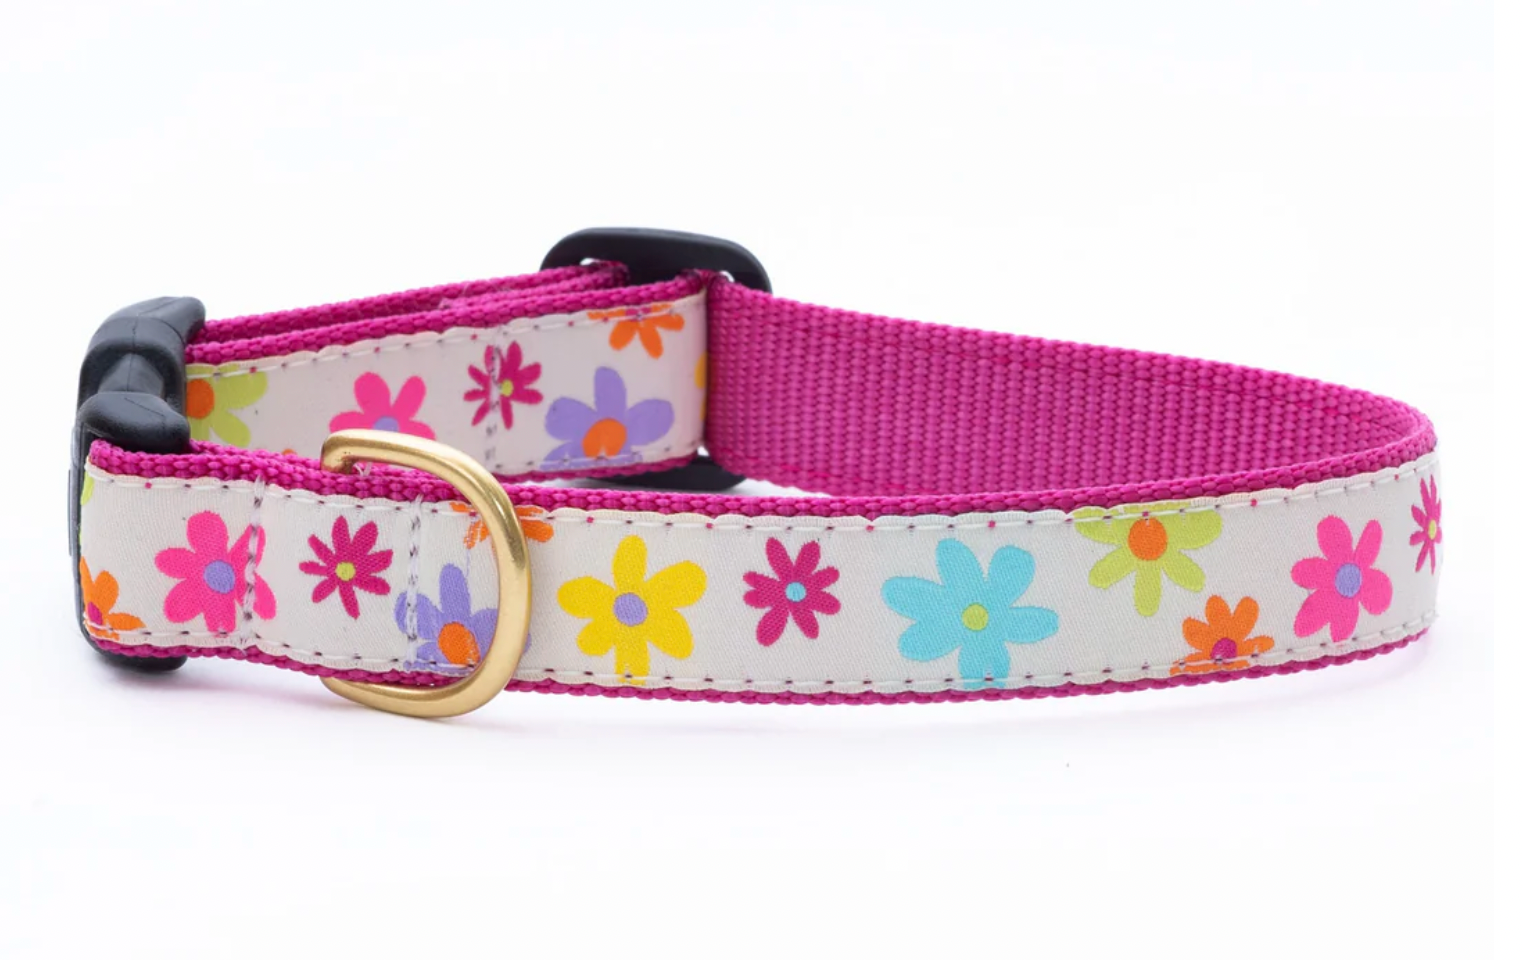 Up Country "Spring Fever" Dog Collar, Blue